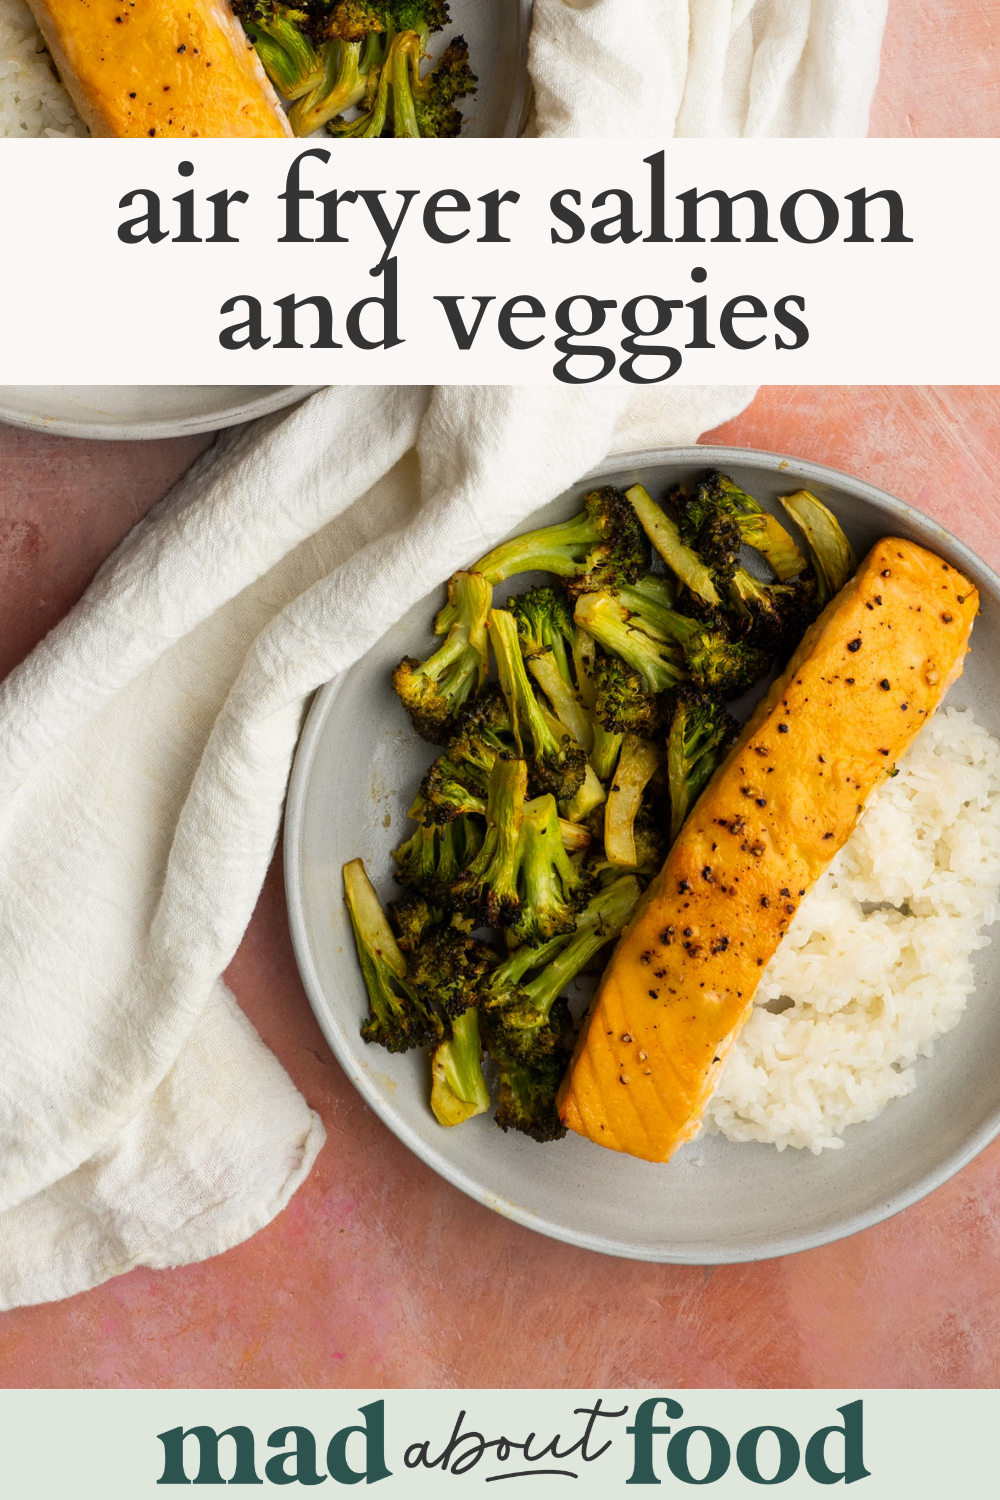 Image for pinning air fryer salmon and veggies recipe on Pinterest